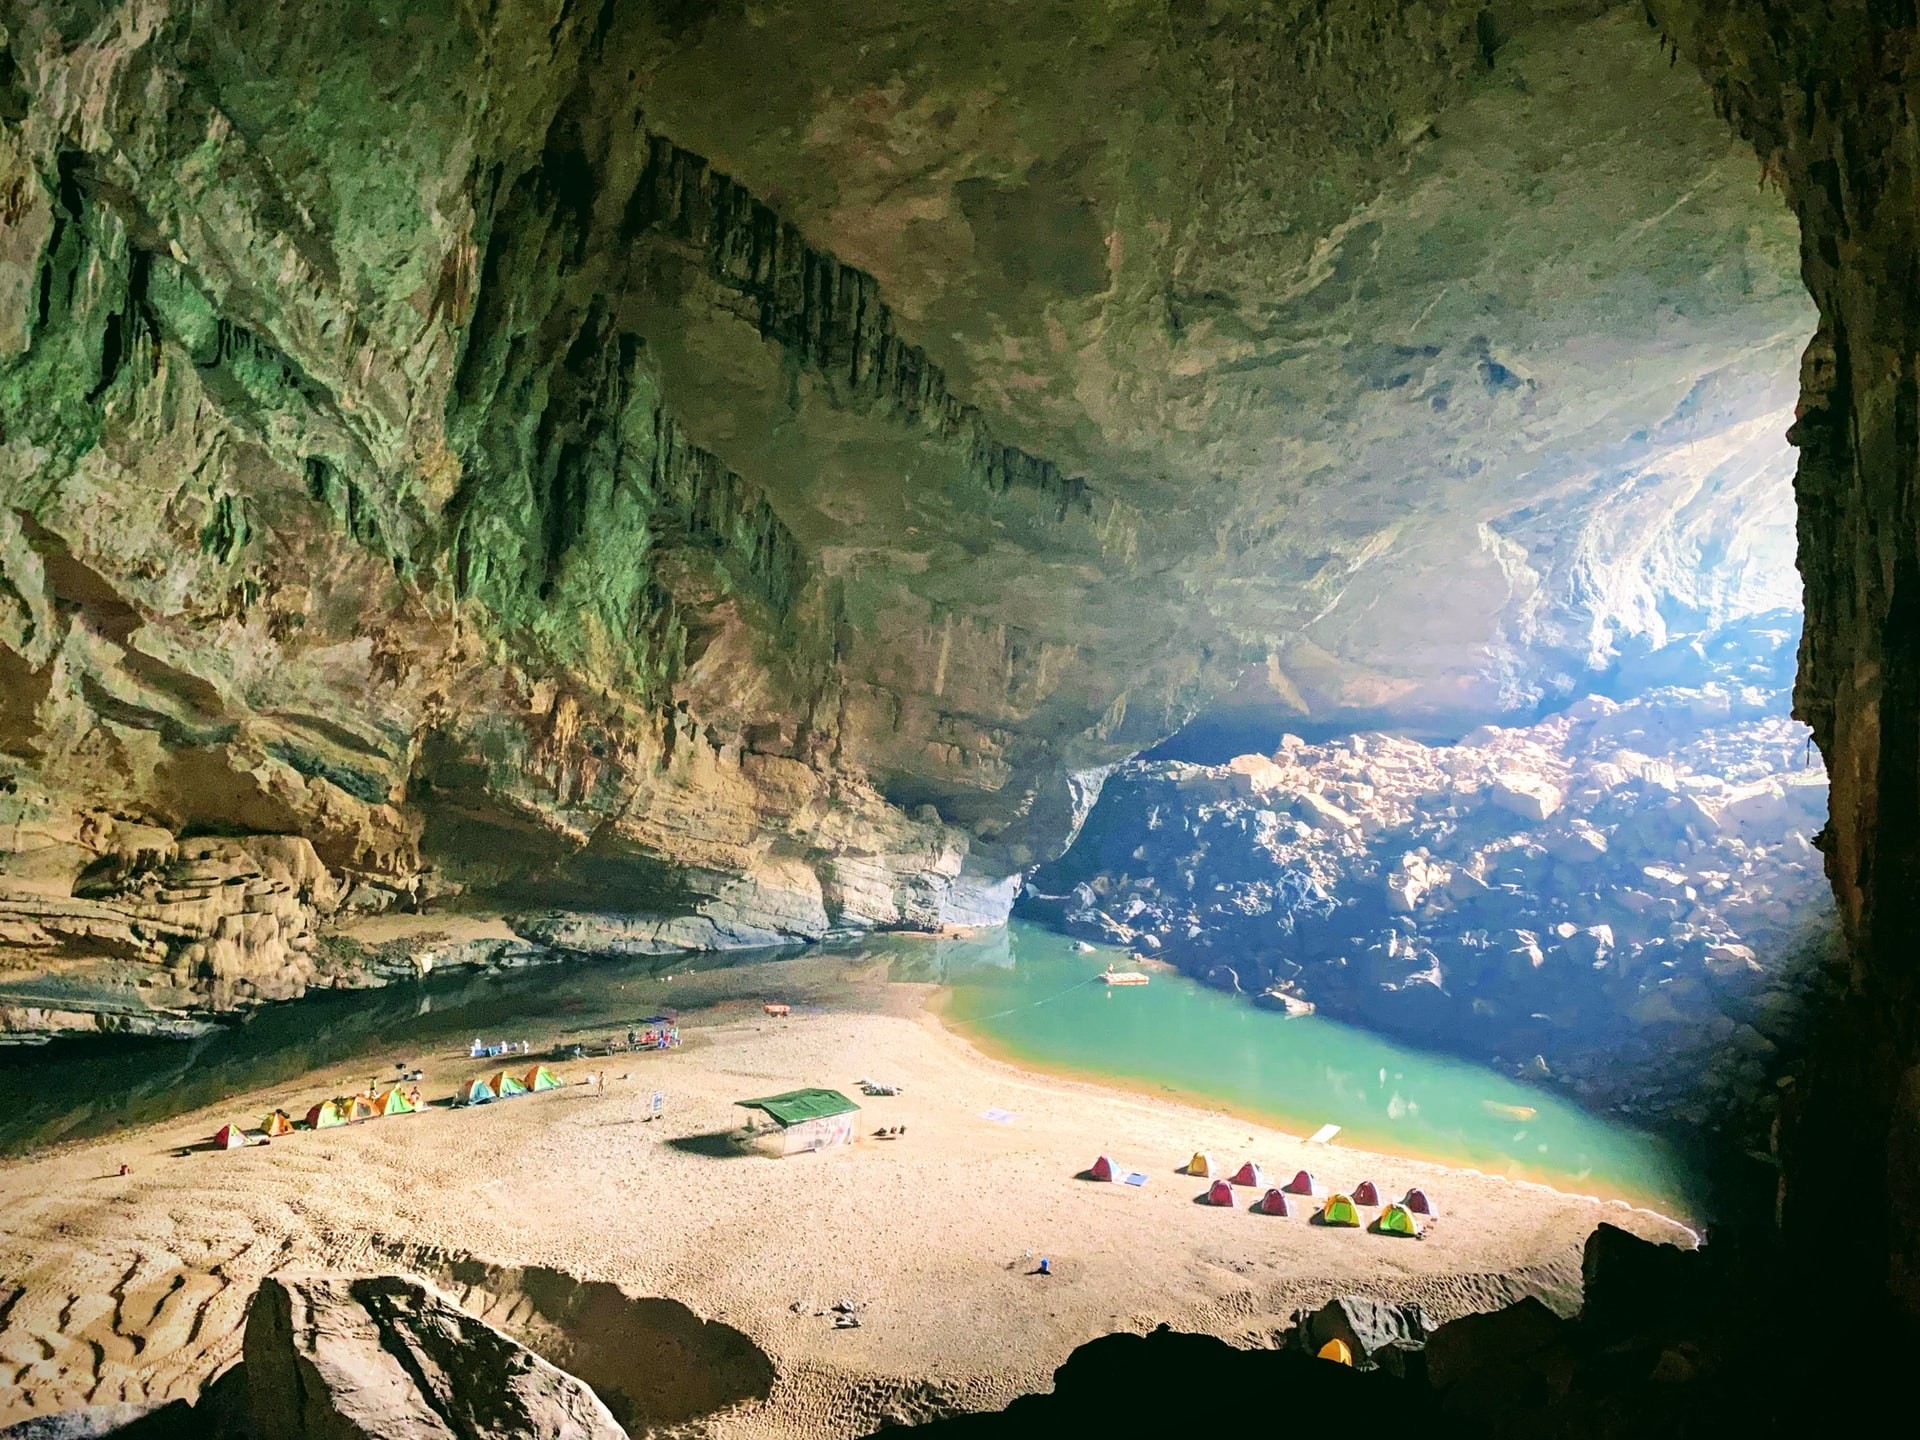 Inside shot of Son Doong, the largest cave in the world, in Vietnam.